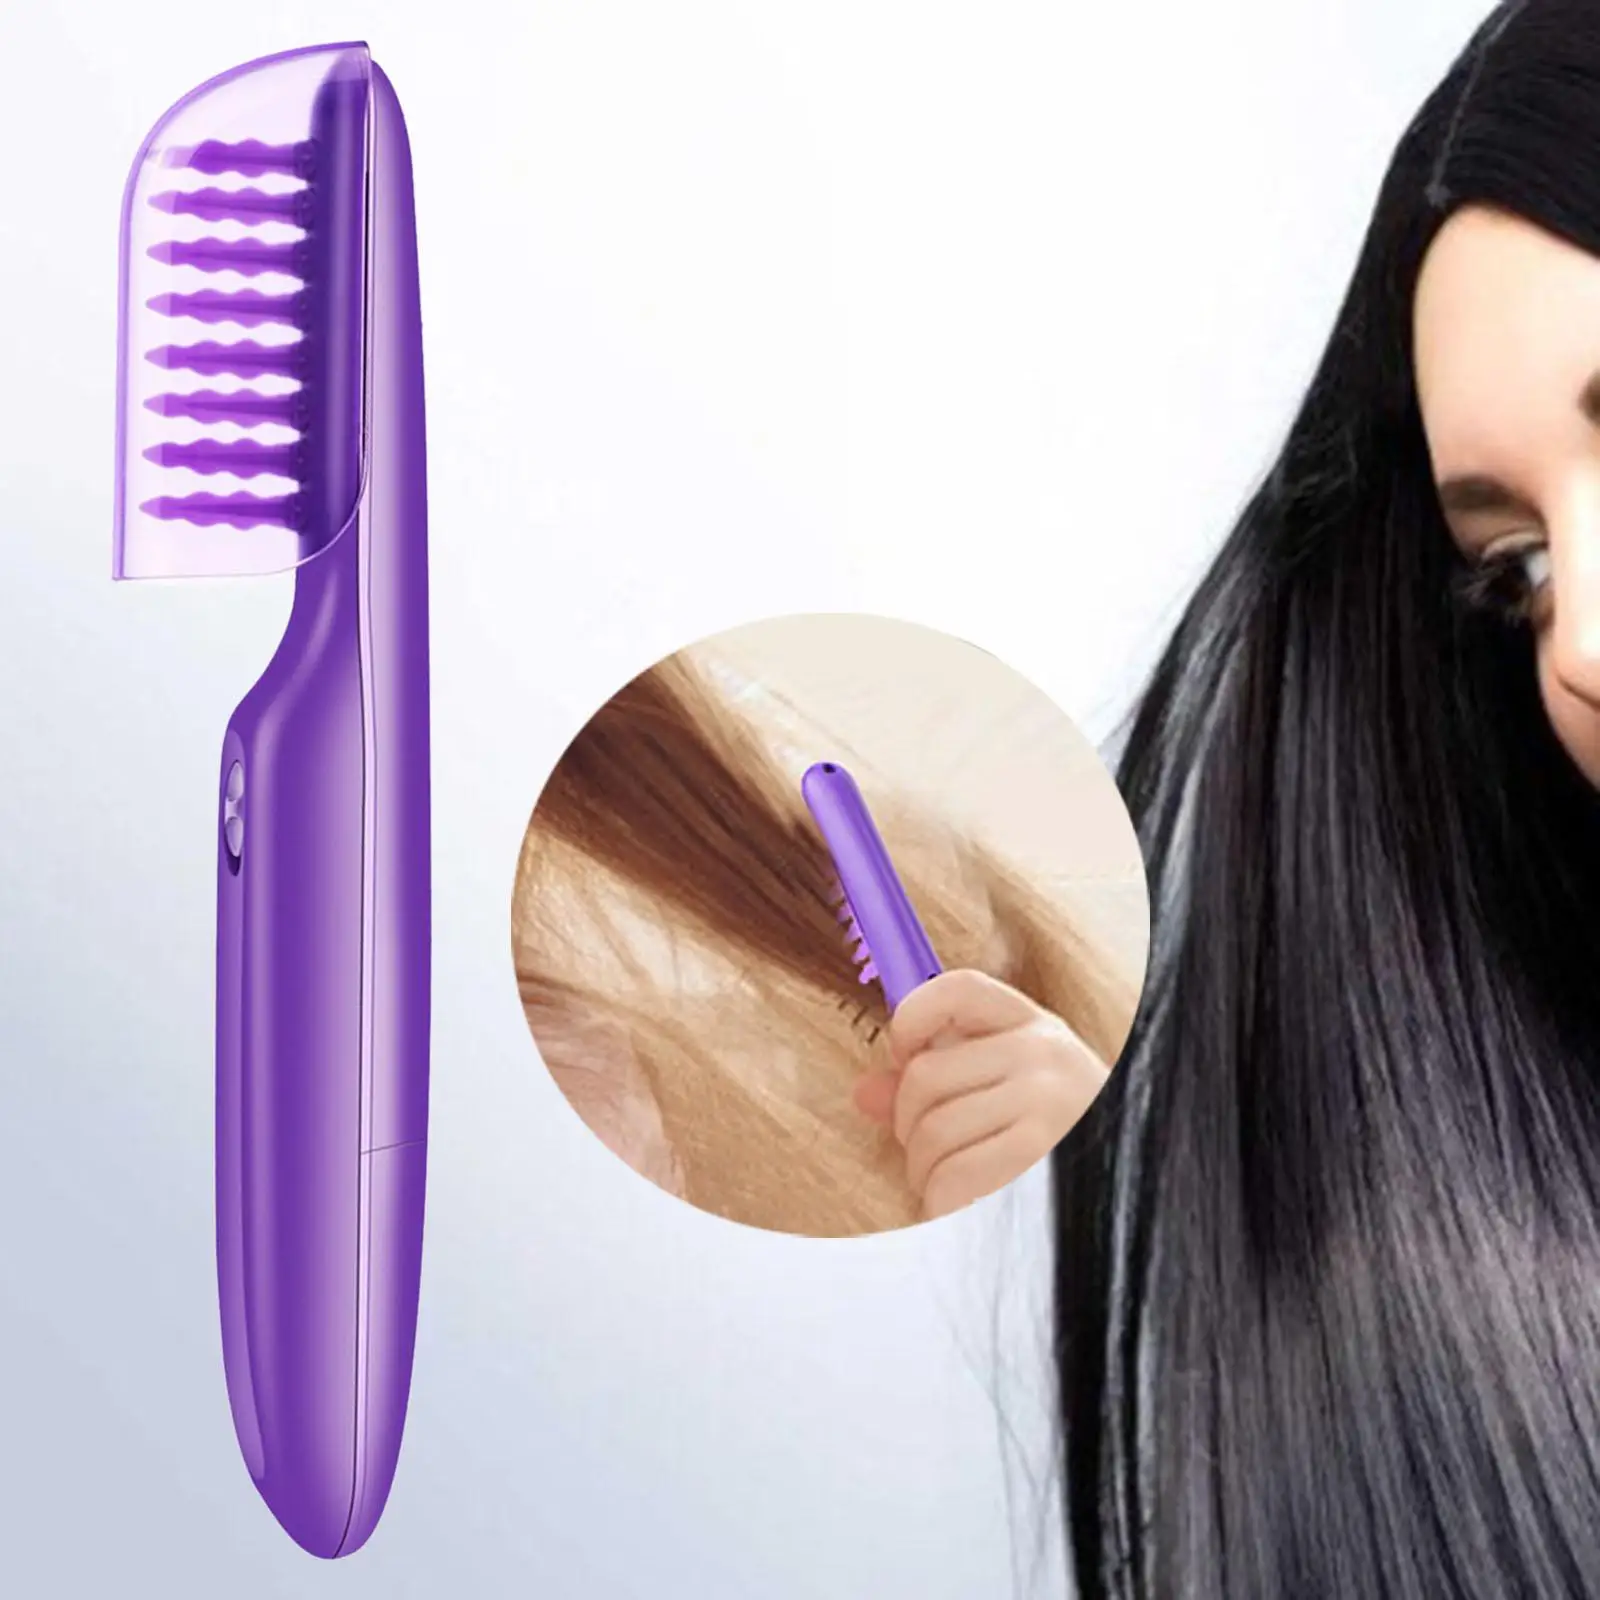  Brush Comb Professional Curly Thick  Hair-Detangler Straightening Wet Fine Detangle Comb for  Styling